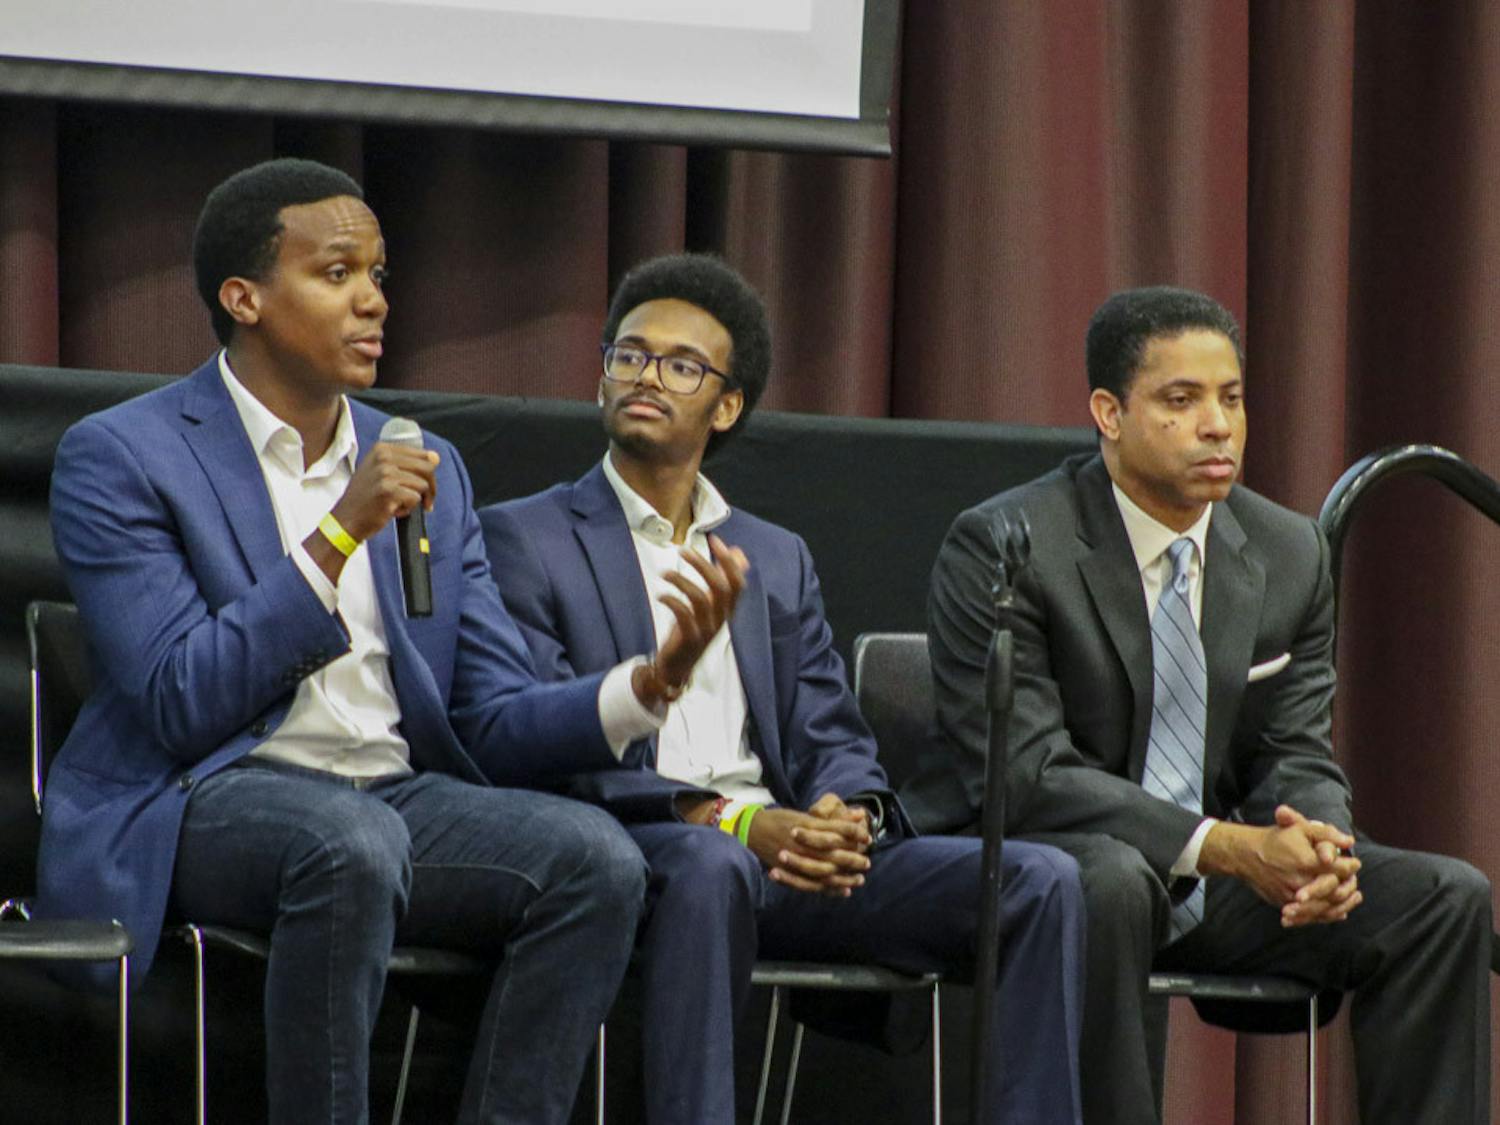 Wilfredo Anderson, a senior consultant at Ernst &amp; Young LLP, takes questions from the audience during the Alpha Kappa Psi "Being Black in the Workspace" event in the Russell House Ballroom on Feb. 20, 2023. Anderson received his Bachelor of Business Administration from USC's Darla Moore School of Business.